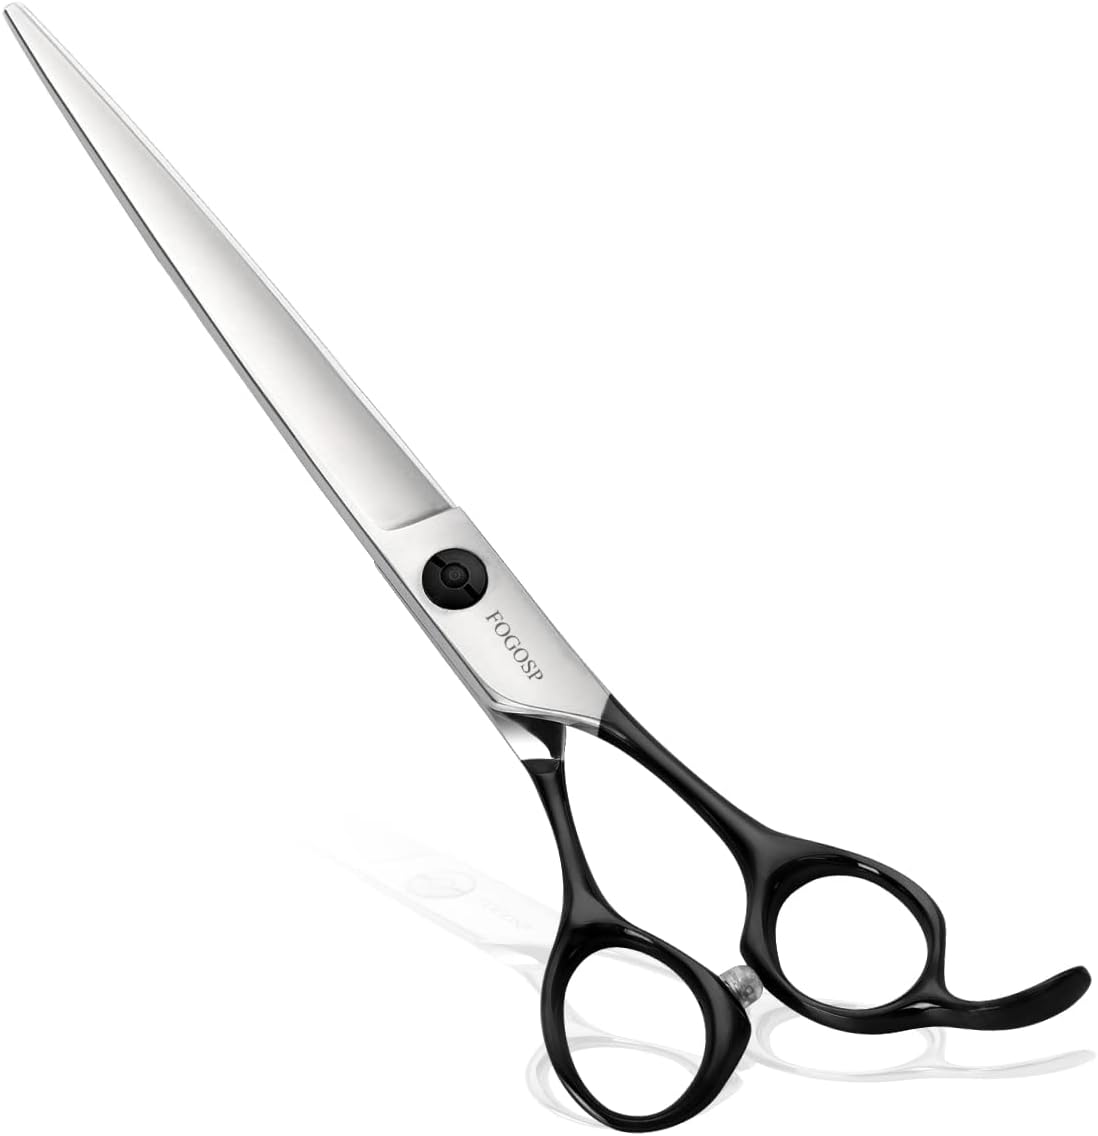 FOGOSP Professional Dog Grooming Scissors: The Perfect Tool for Efficient and Comfortable Pet Grooming